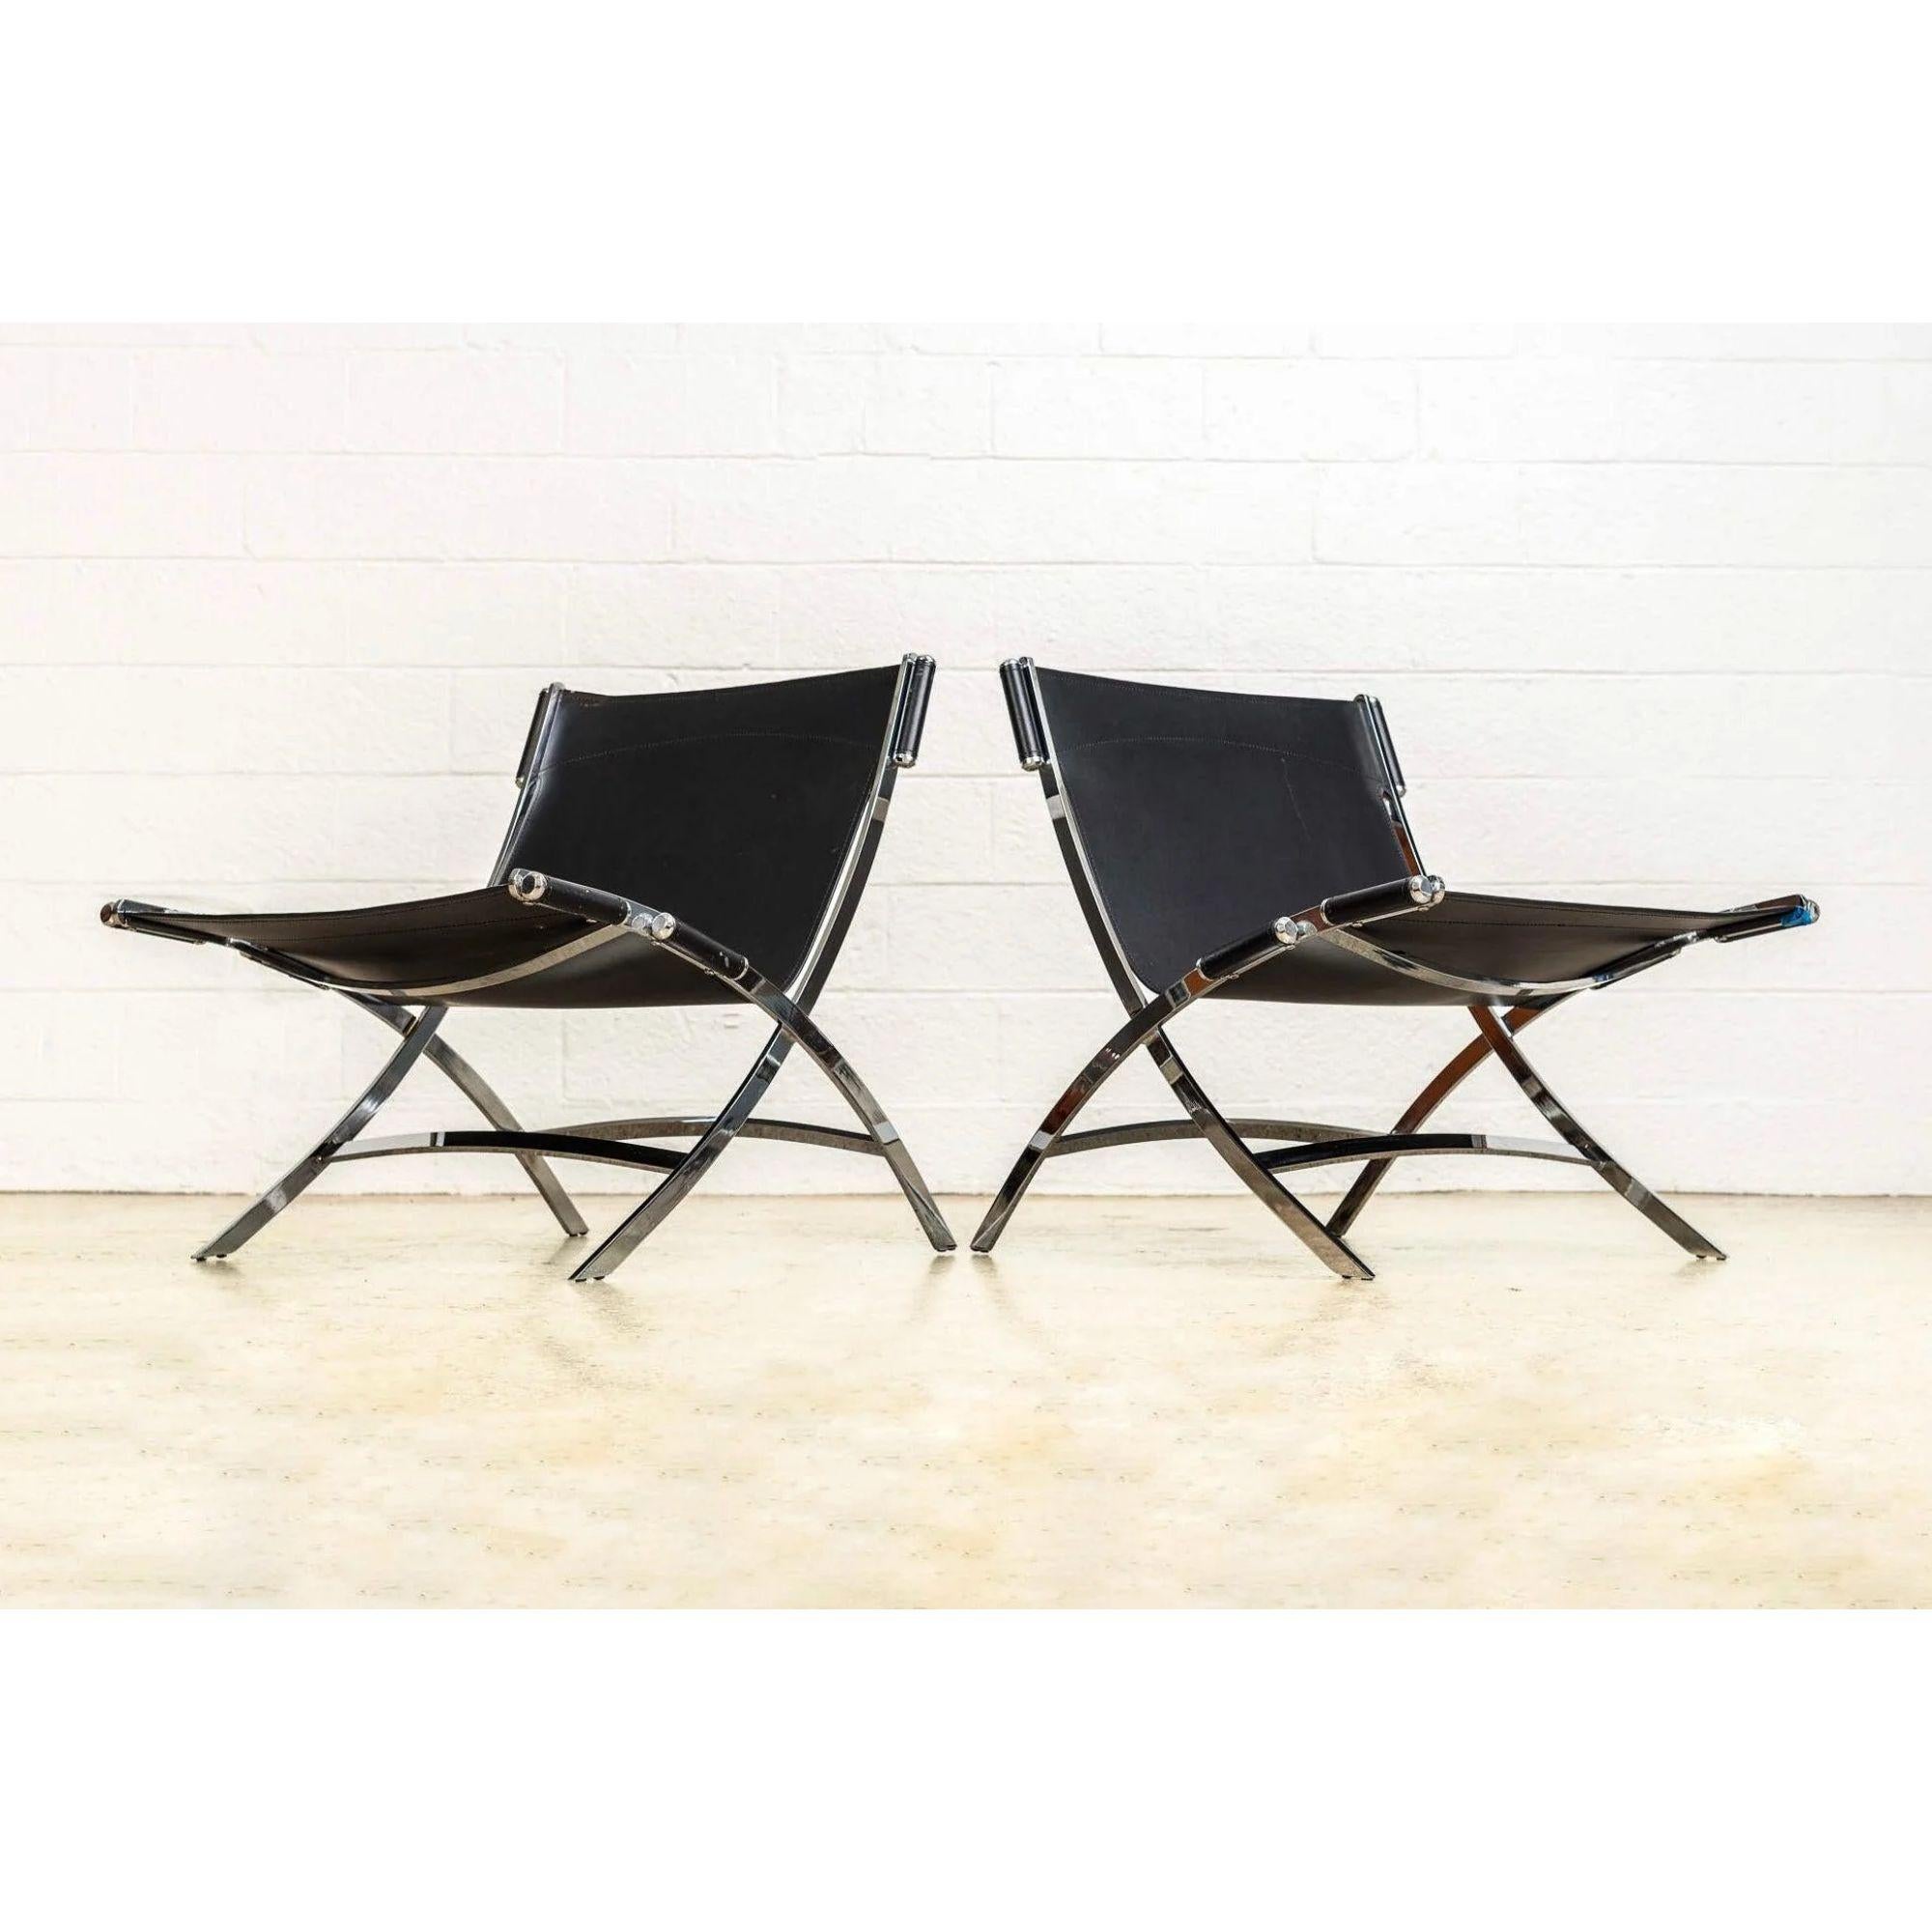 Italian Postmodern Chrome & Black Leather Timeless Lounge Chairs by Antonio Citterio For Sale